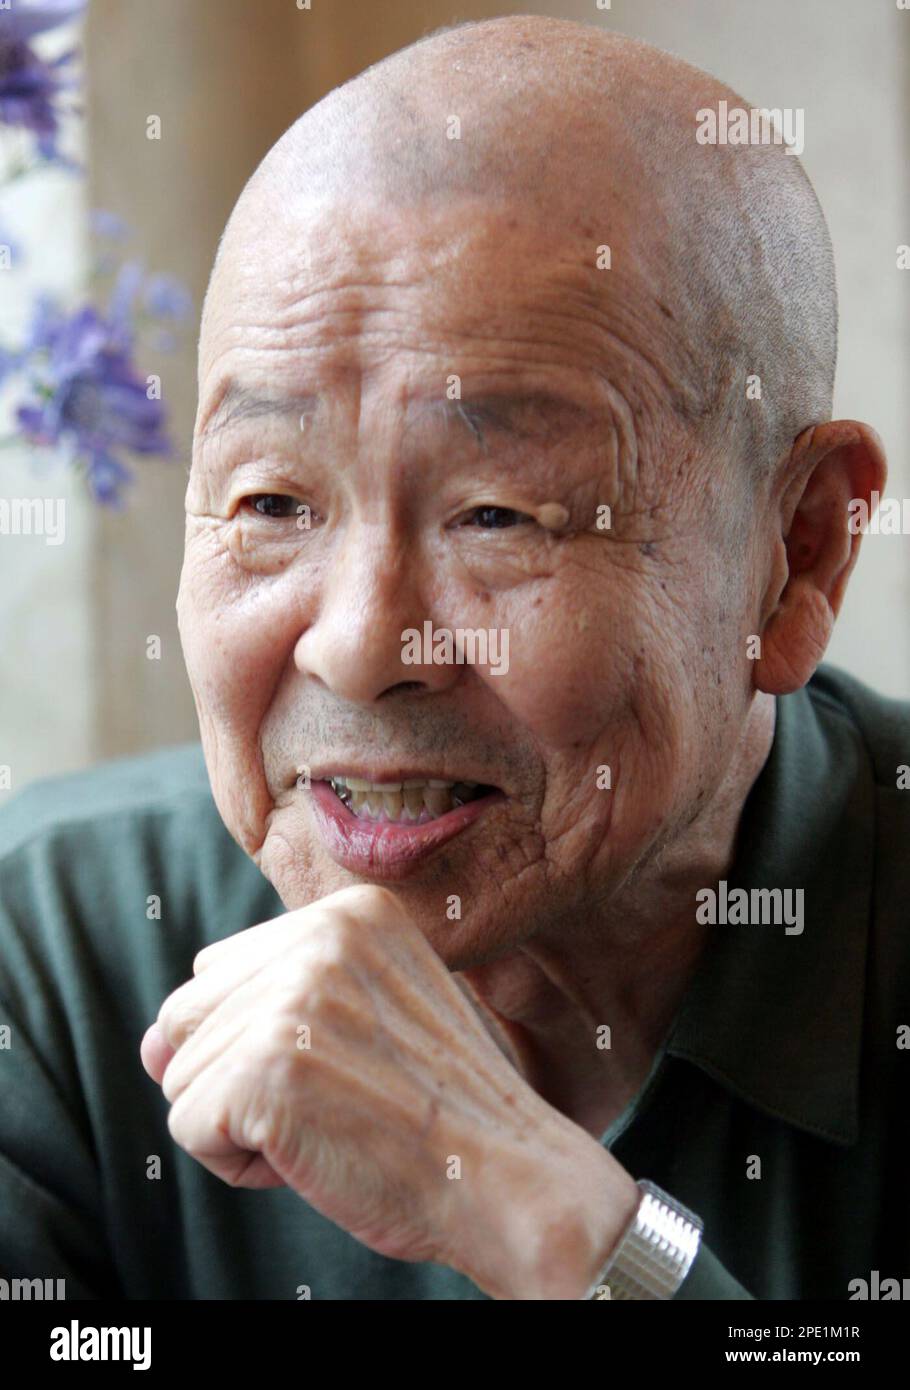 Former Kamikaze pilot Toshio Yoshitake , 82, speaks during an interview with The Associated Press in Funabashi, east of Tokyo, June 16, 2005. Yoshitake, who lost all other17 pilots and flight instructors in the "Special Assault Corps" unit who took off with him from the Imperial Army airstrip just east of Tokyo in November, 1944, shrugs off Yasukuni Shrine's political baggage."We have a right to pay our respects," he said. (AP Photo/Katsumi Kasahara) Stock Photo